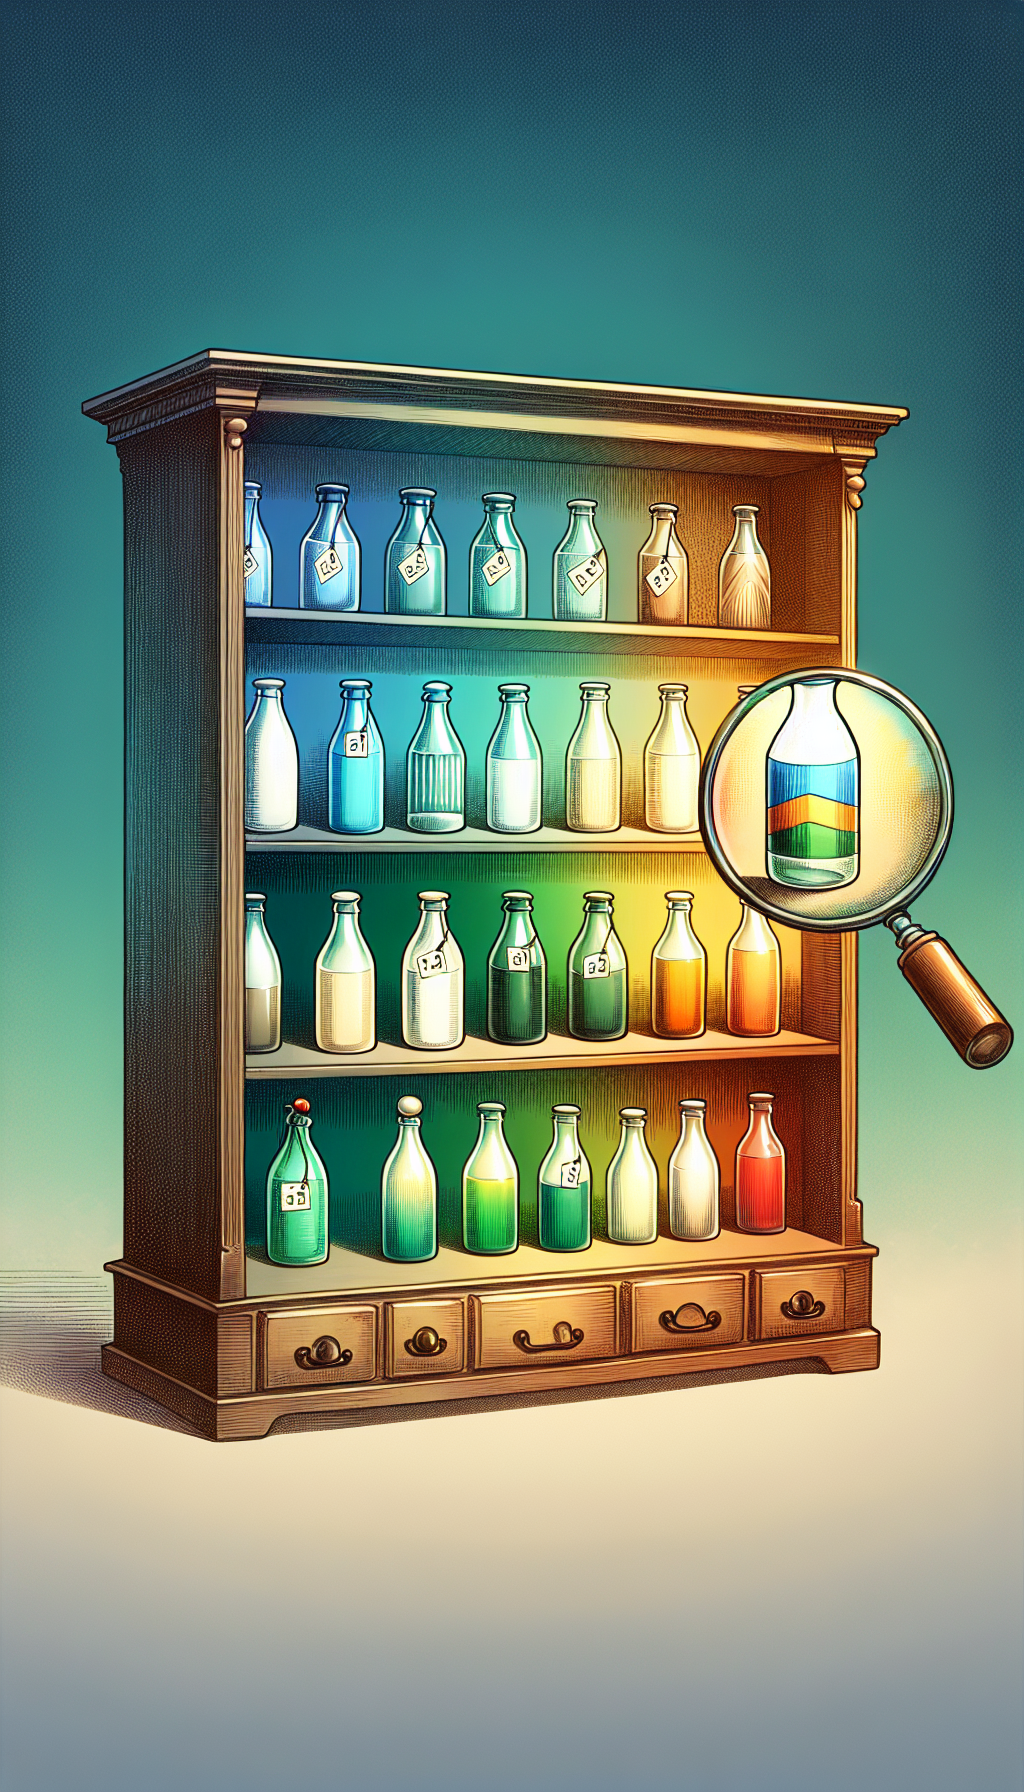 A whimsical illustration showcases a gradient-shelved display, with vintage milk bottles ascending in rarity and value from bottom to top. Each bottle is uniquely styled—art deco, retro, mid-century—emitting a soft glow to symbolize its worth. A magnifying glass hovers over the most prized at the pinnacle, focusing on a price tag that morphs into a prestigious auction hammer.